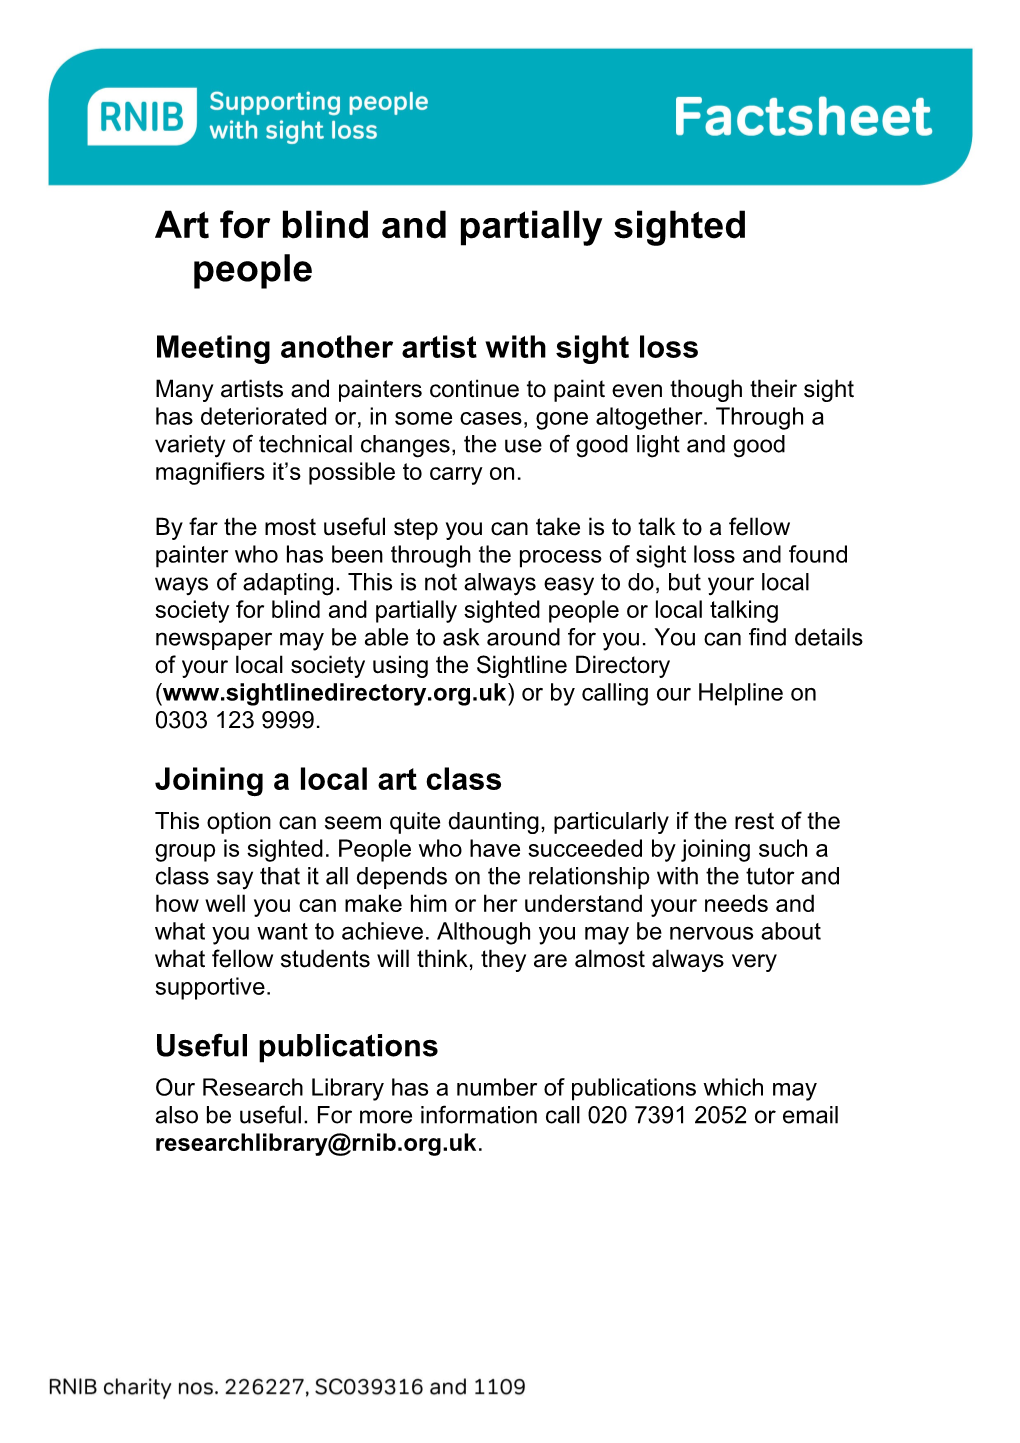 Art for Blind and Partially Sighted People Factsheet